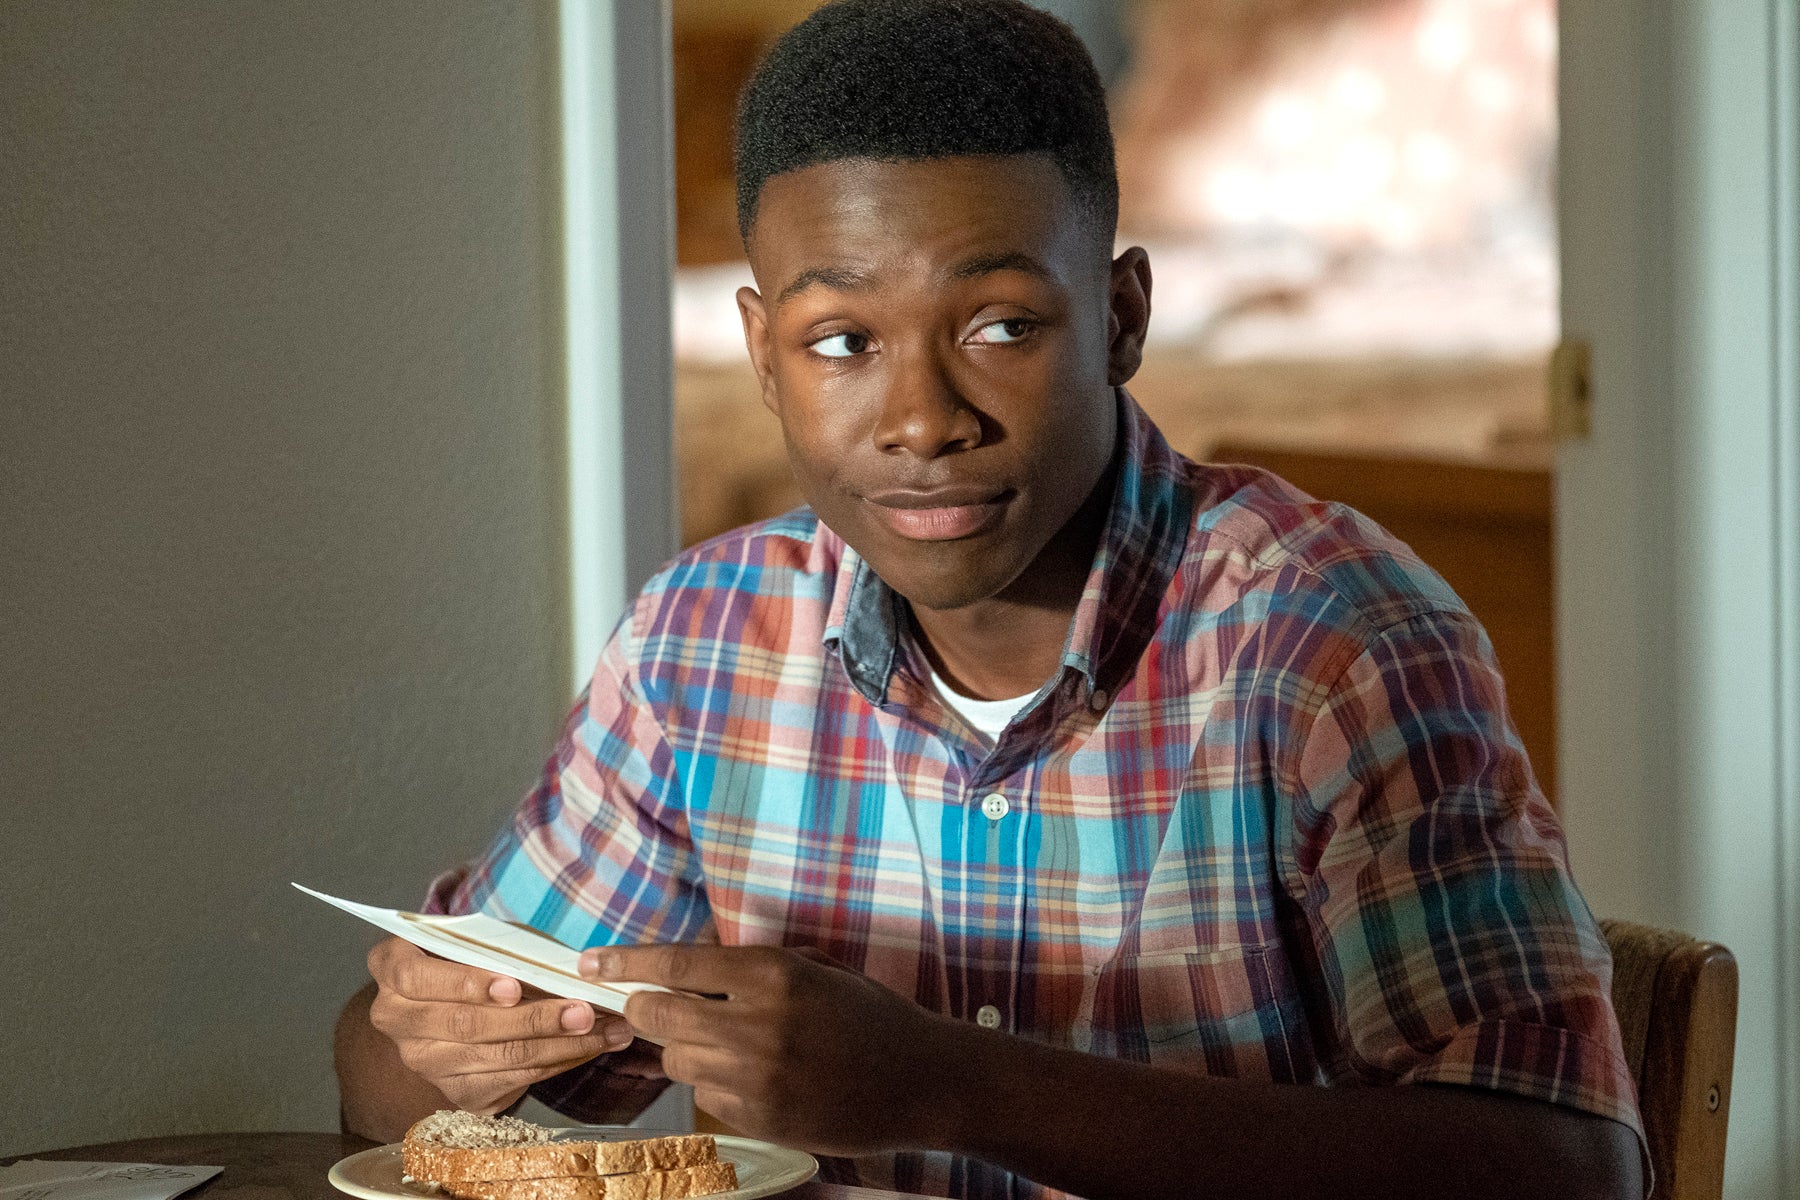 A young Randall Pearson (Niles Fitch) sits at a table with a sandwich while holding a paper in an episode of This Is Us.